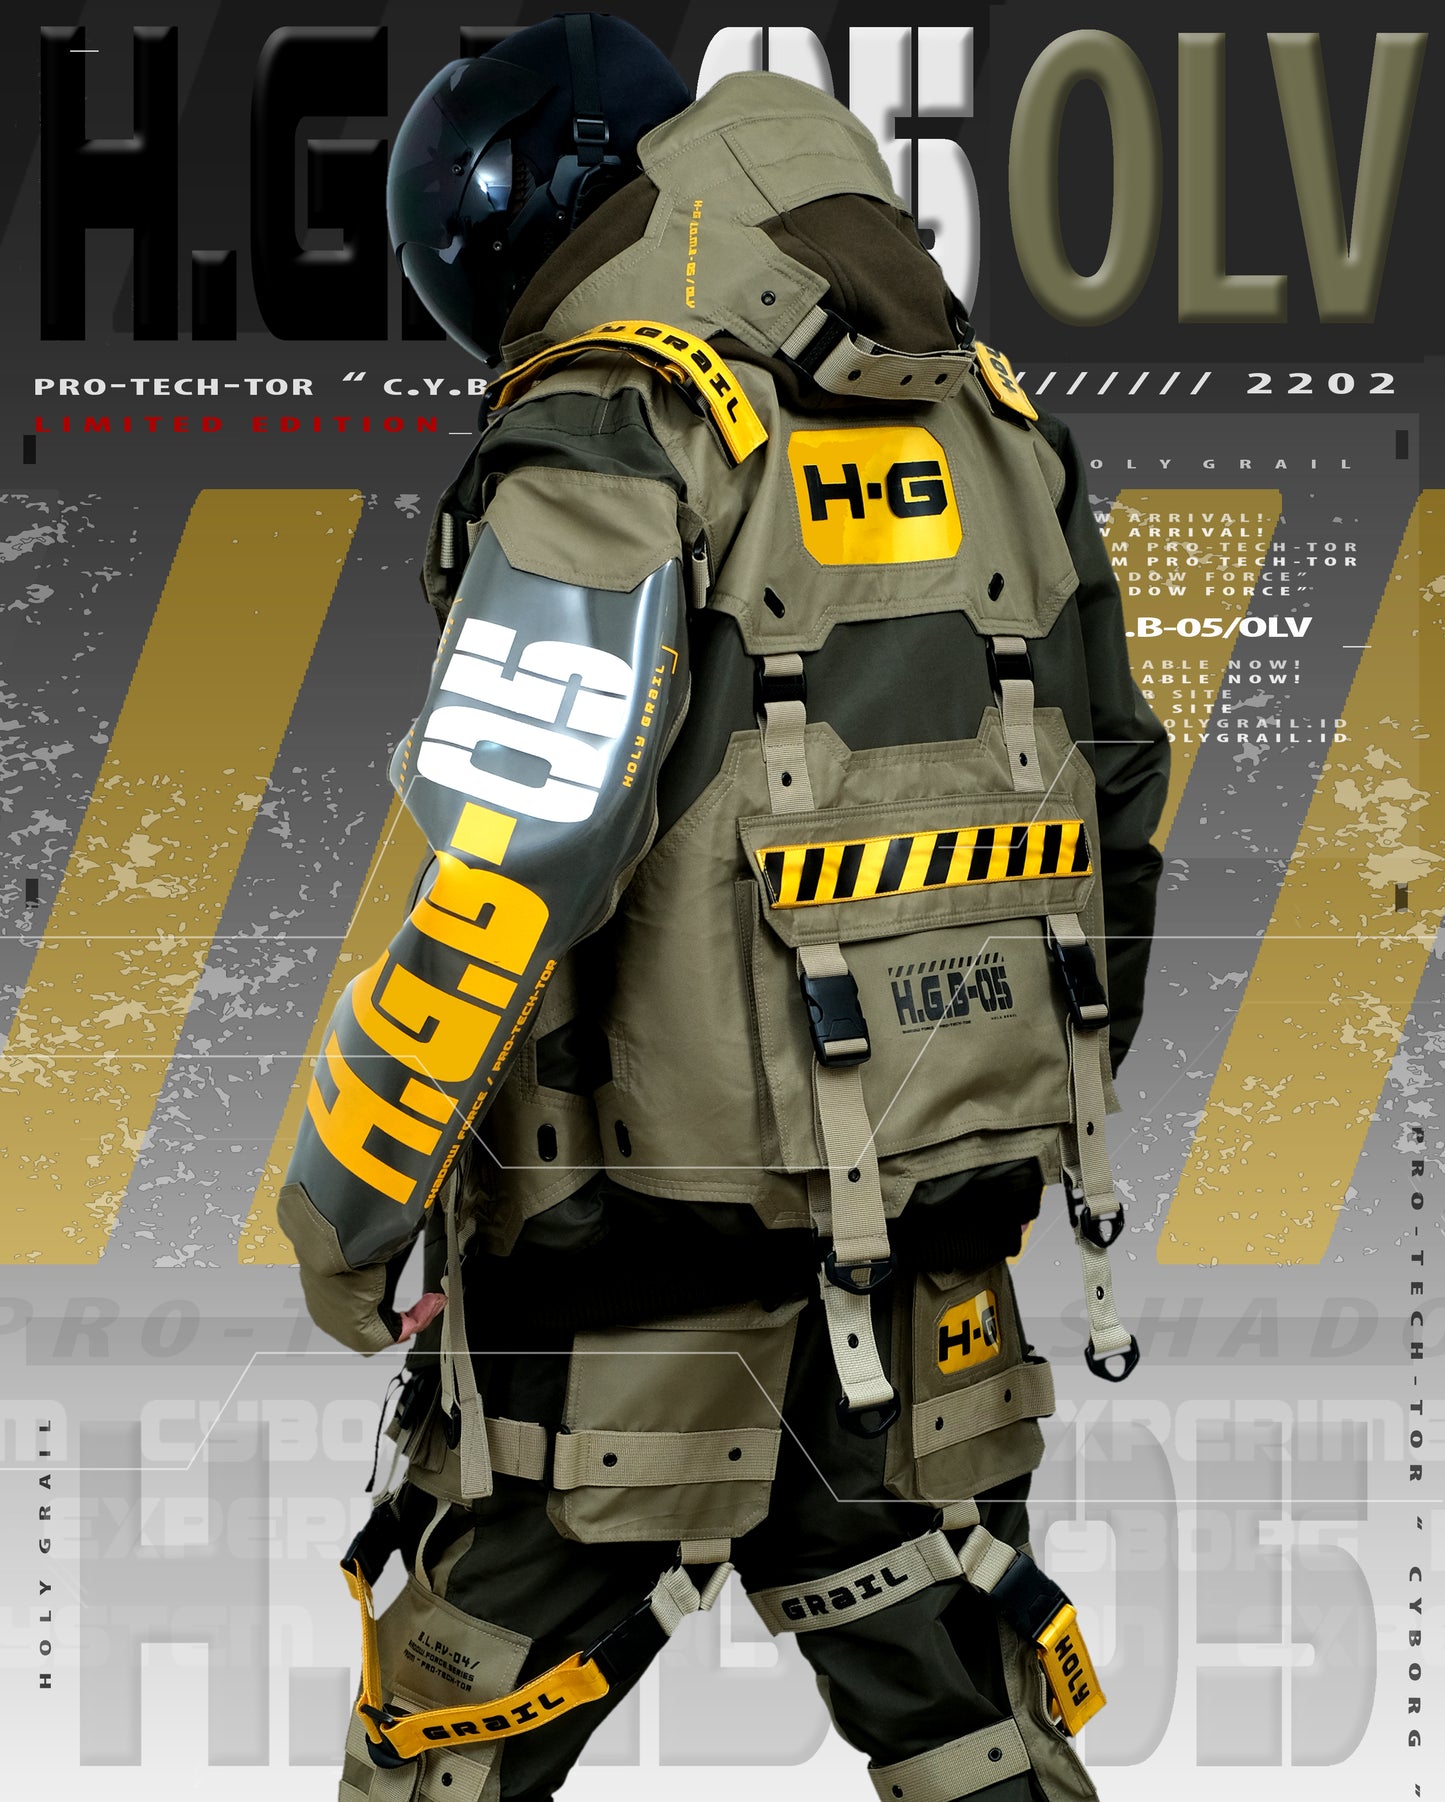 H.G.B-05/OLV (LIMITED EDITION 200 PIECES ONLY!) SOLD OUT!